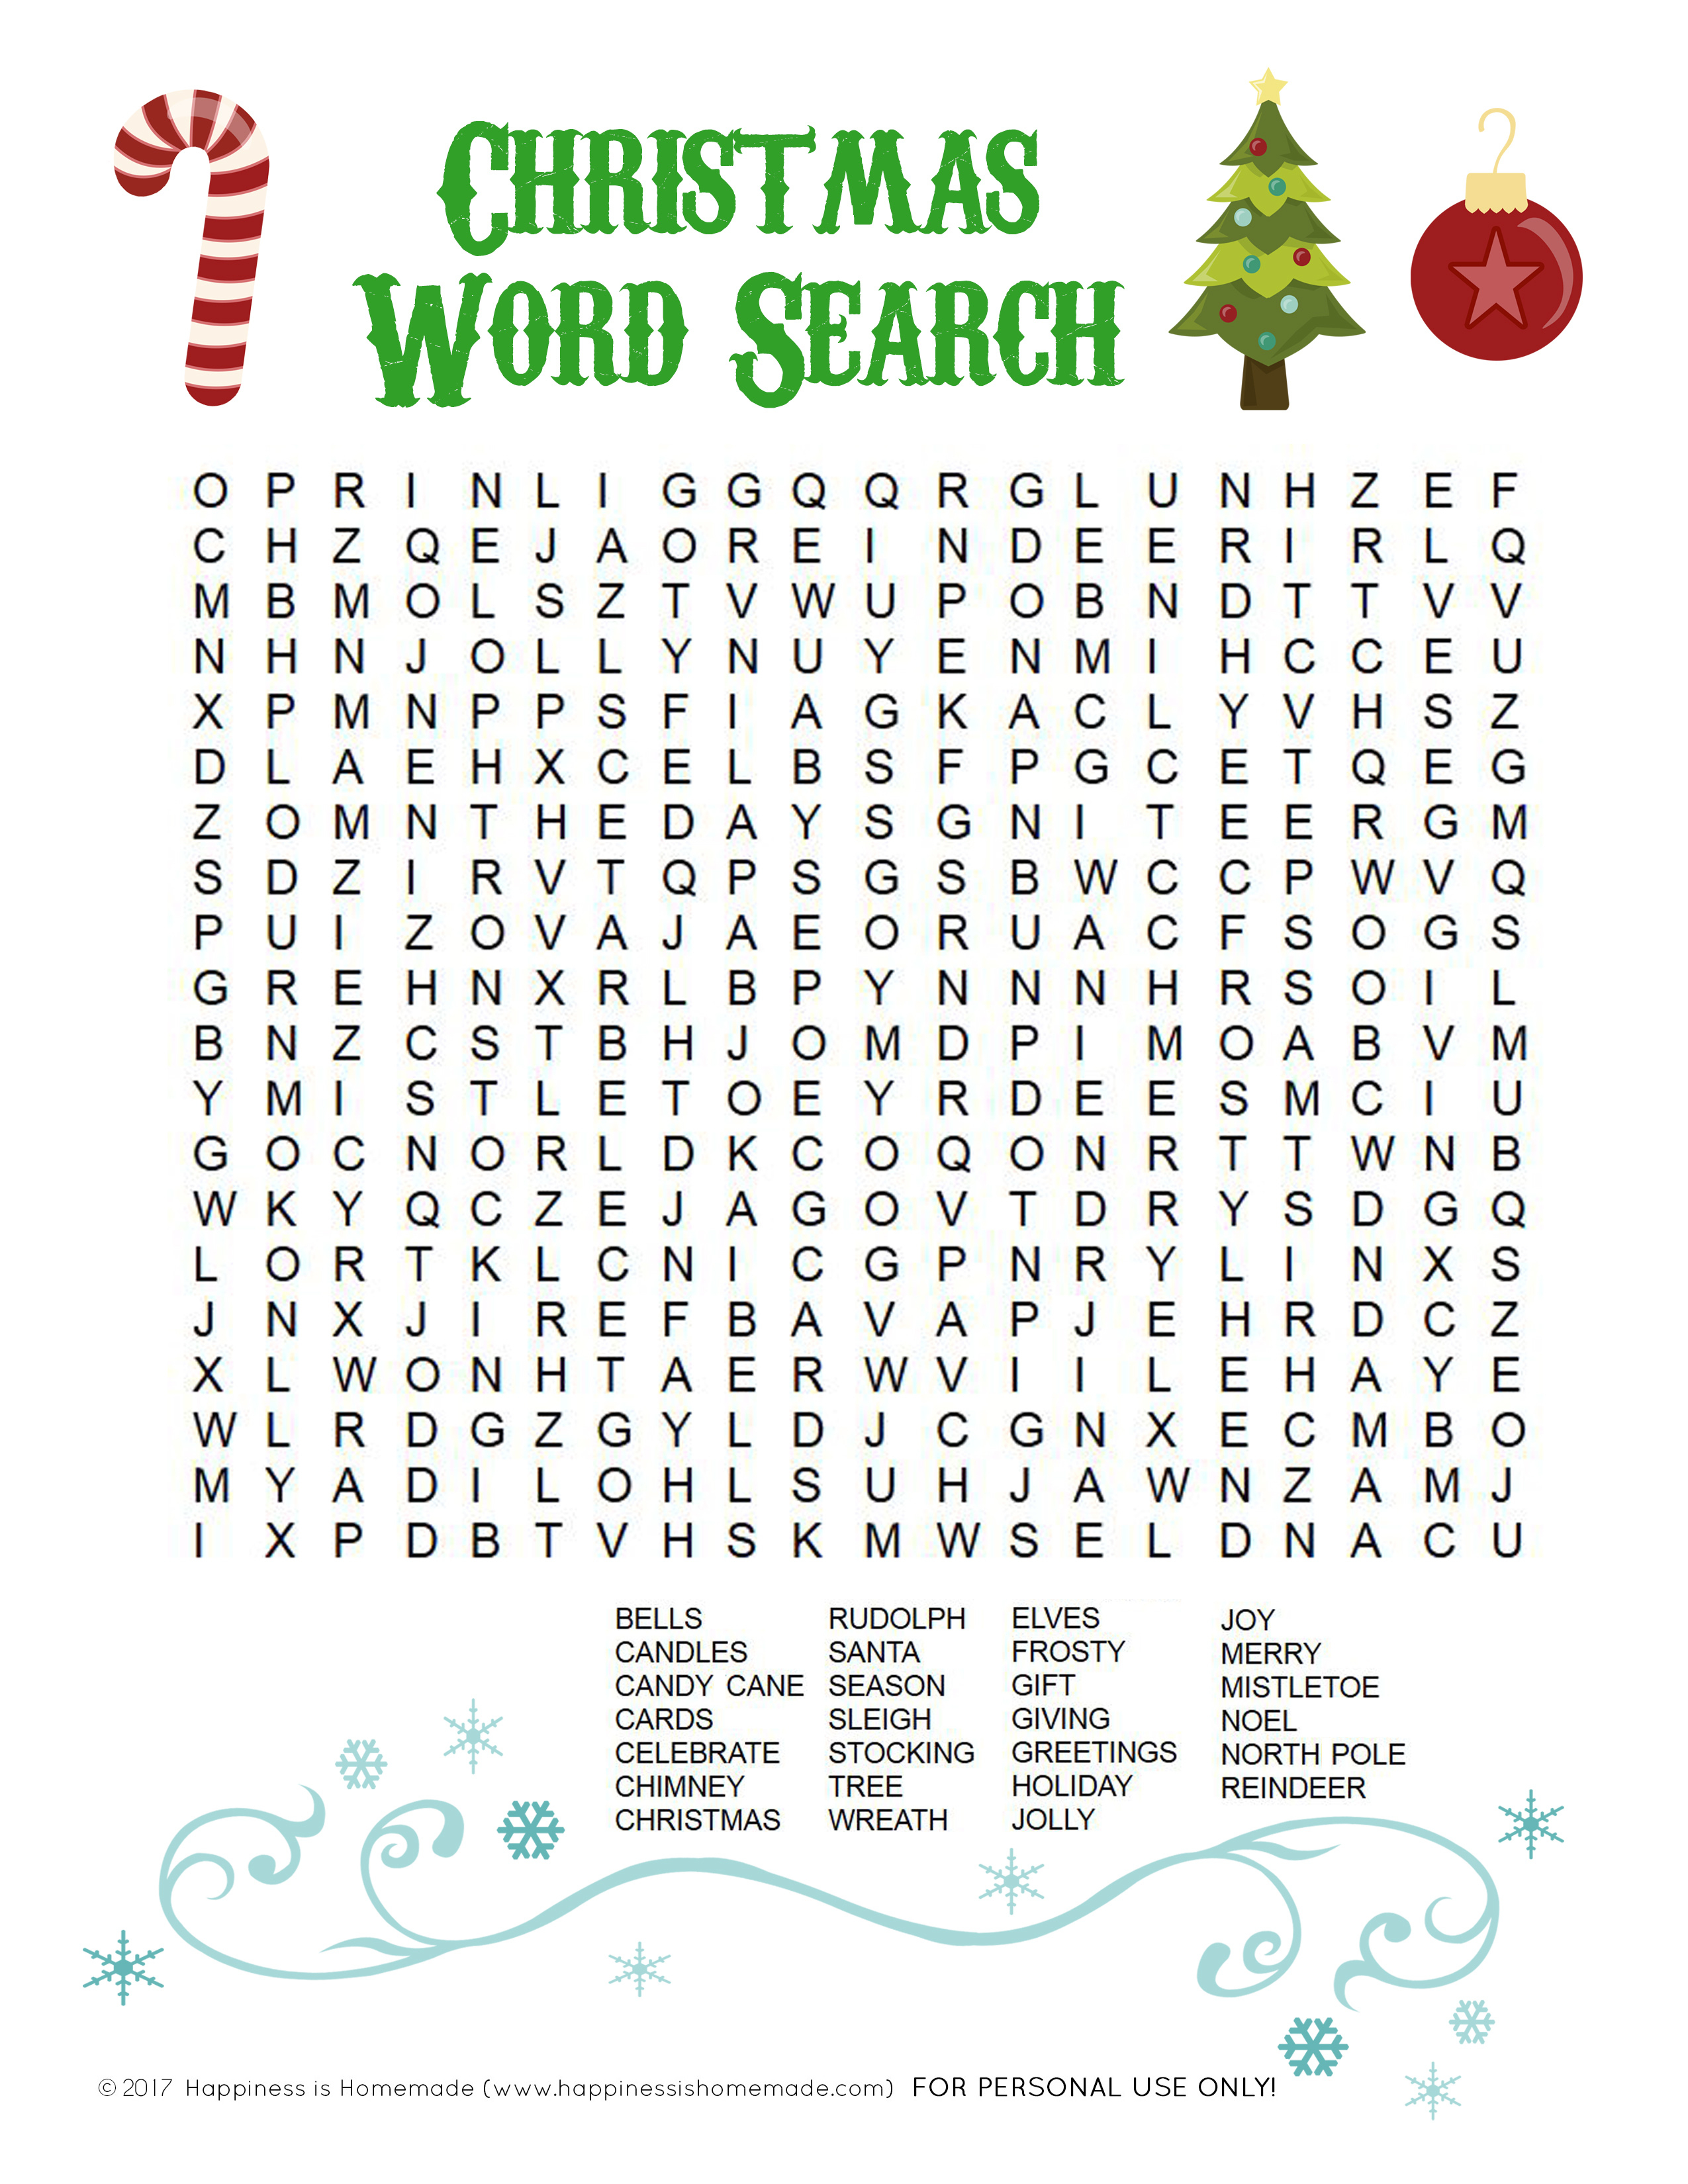 Printable Christmas Word Search For Kids &amp;amp; Adults - Happiness Is - Printable Christmas Crossword Puzzles For Adults With Answers